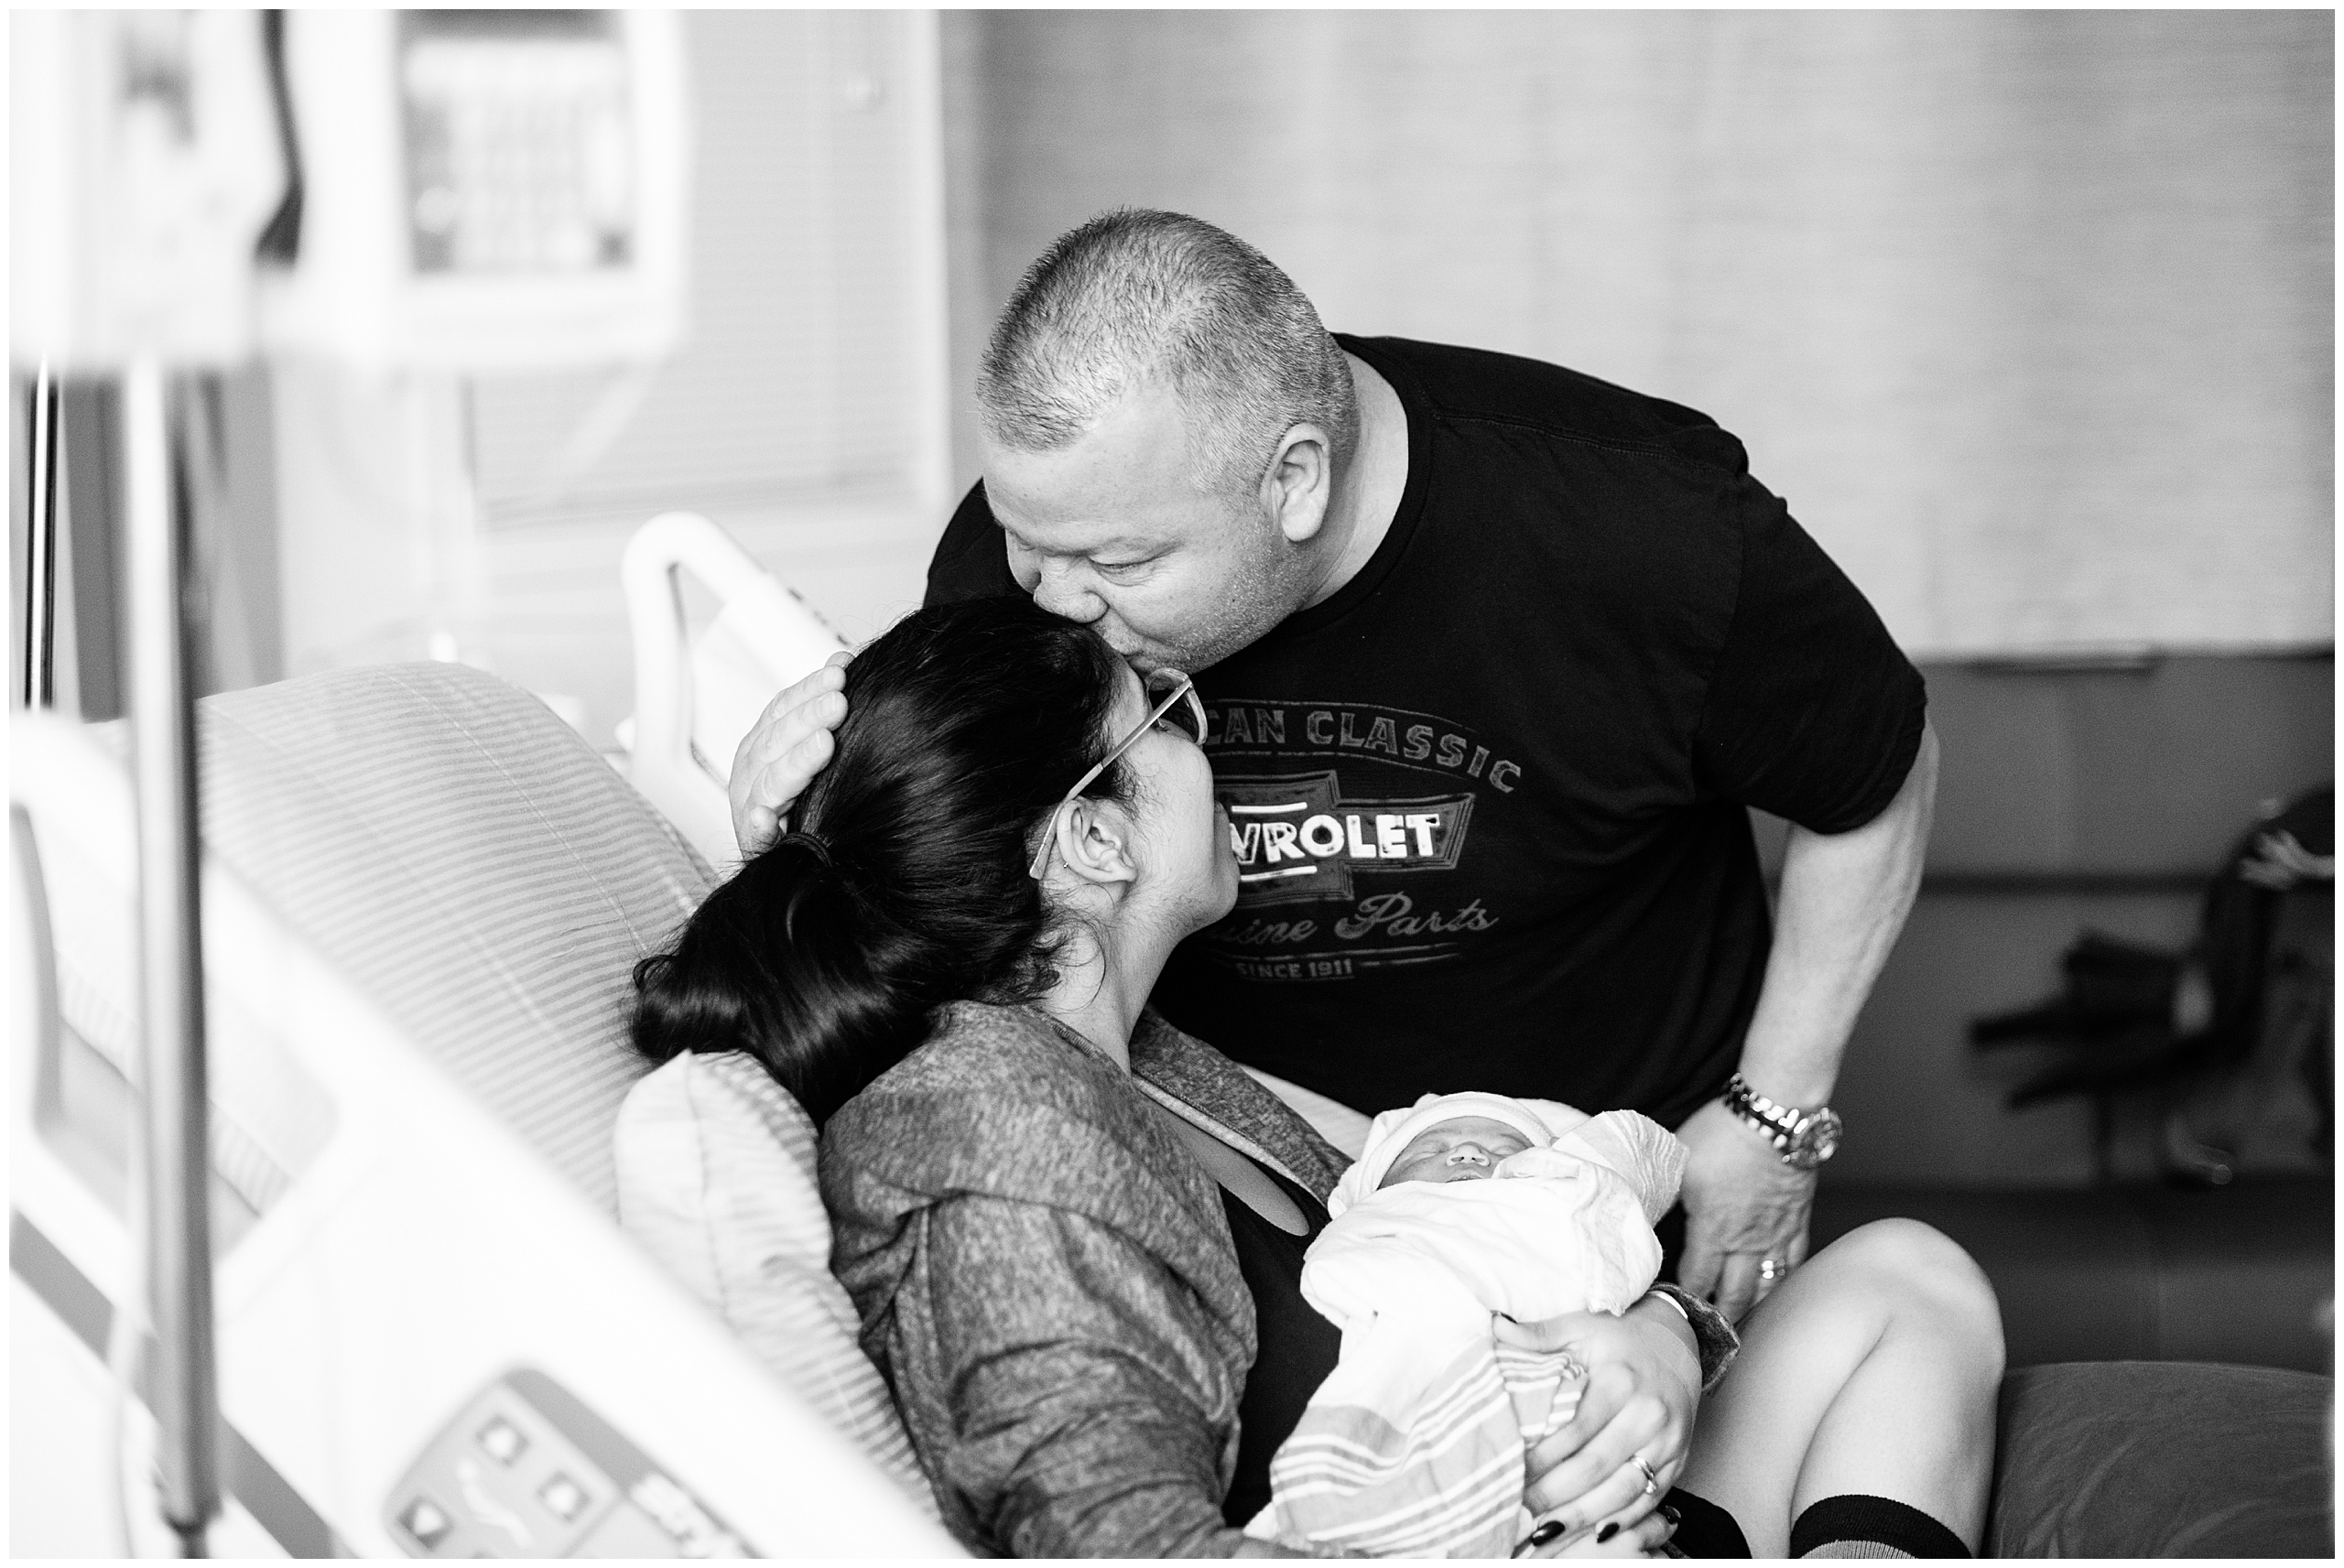 Orlando Birth Photography Haleigh Nicole Photography Celebration Hospital Labor and Delivery